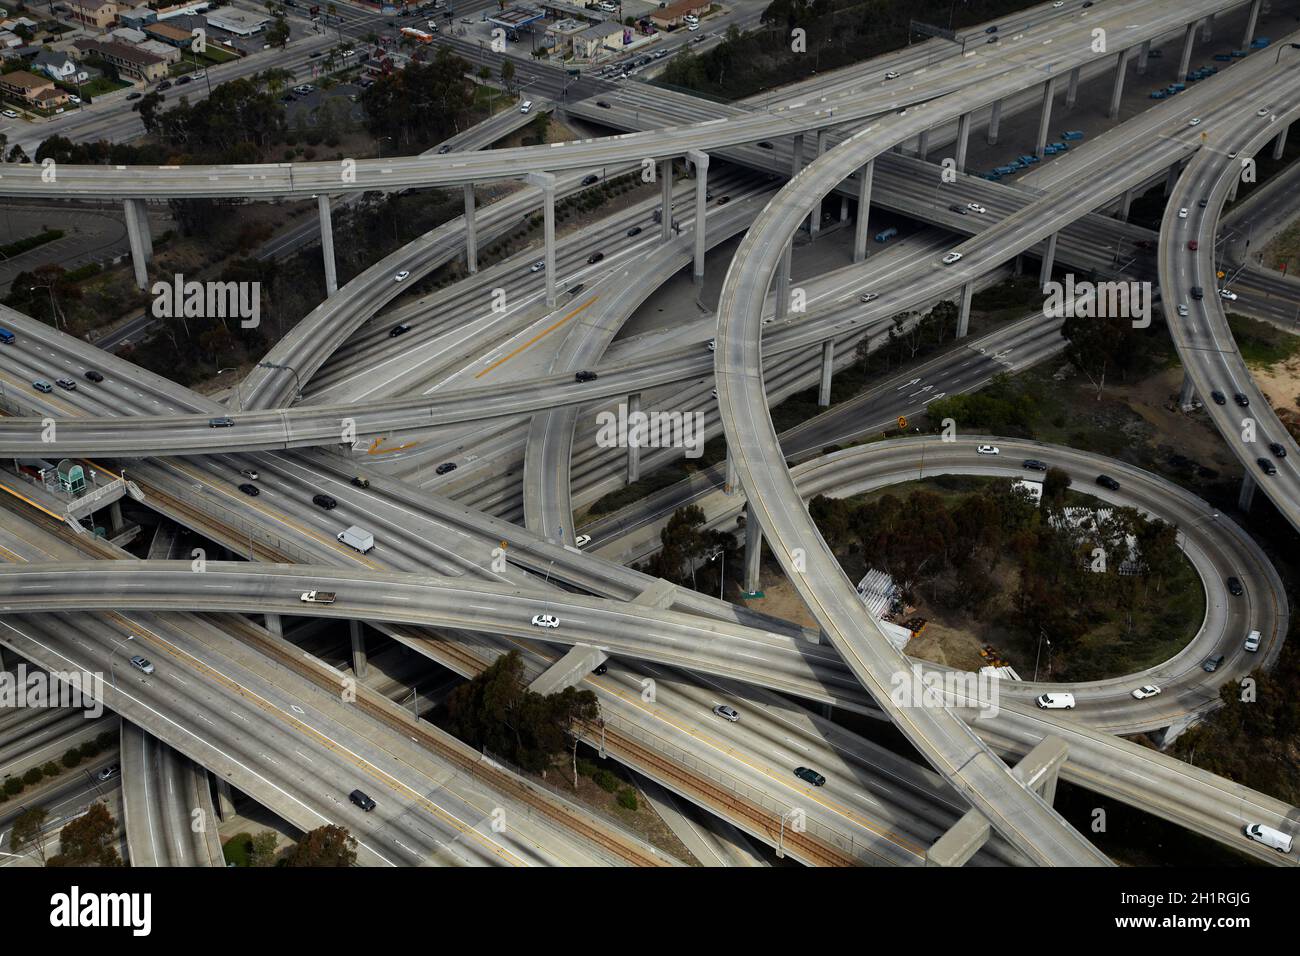 Judge Harry Pregerson Interchange, junction of I-105 and I-110 (Glenn Anderson Freeway and Harbor Freeway), Los Angeles, California, USA. Stock Photo